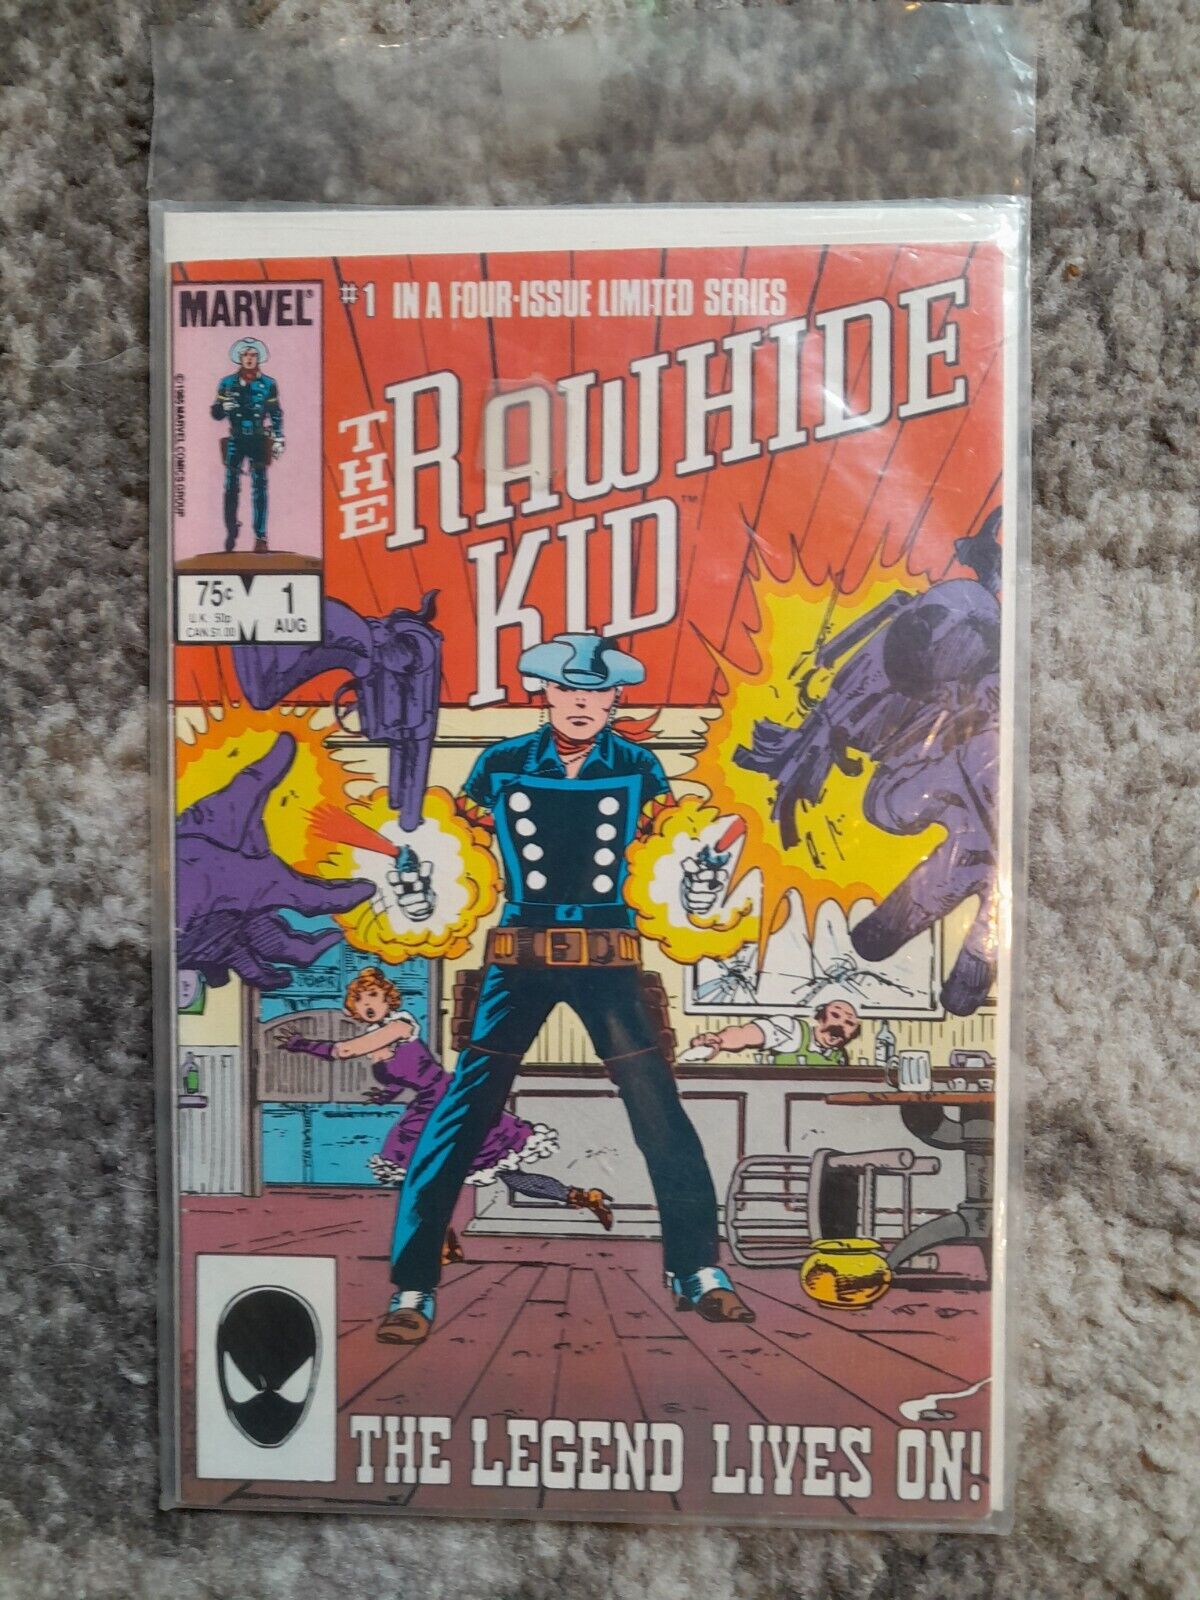 THE RAWHIDE KID #1 MARVEL COMICS 1985 BAGGED AND BOARDED 